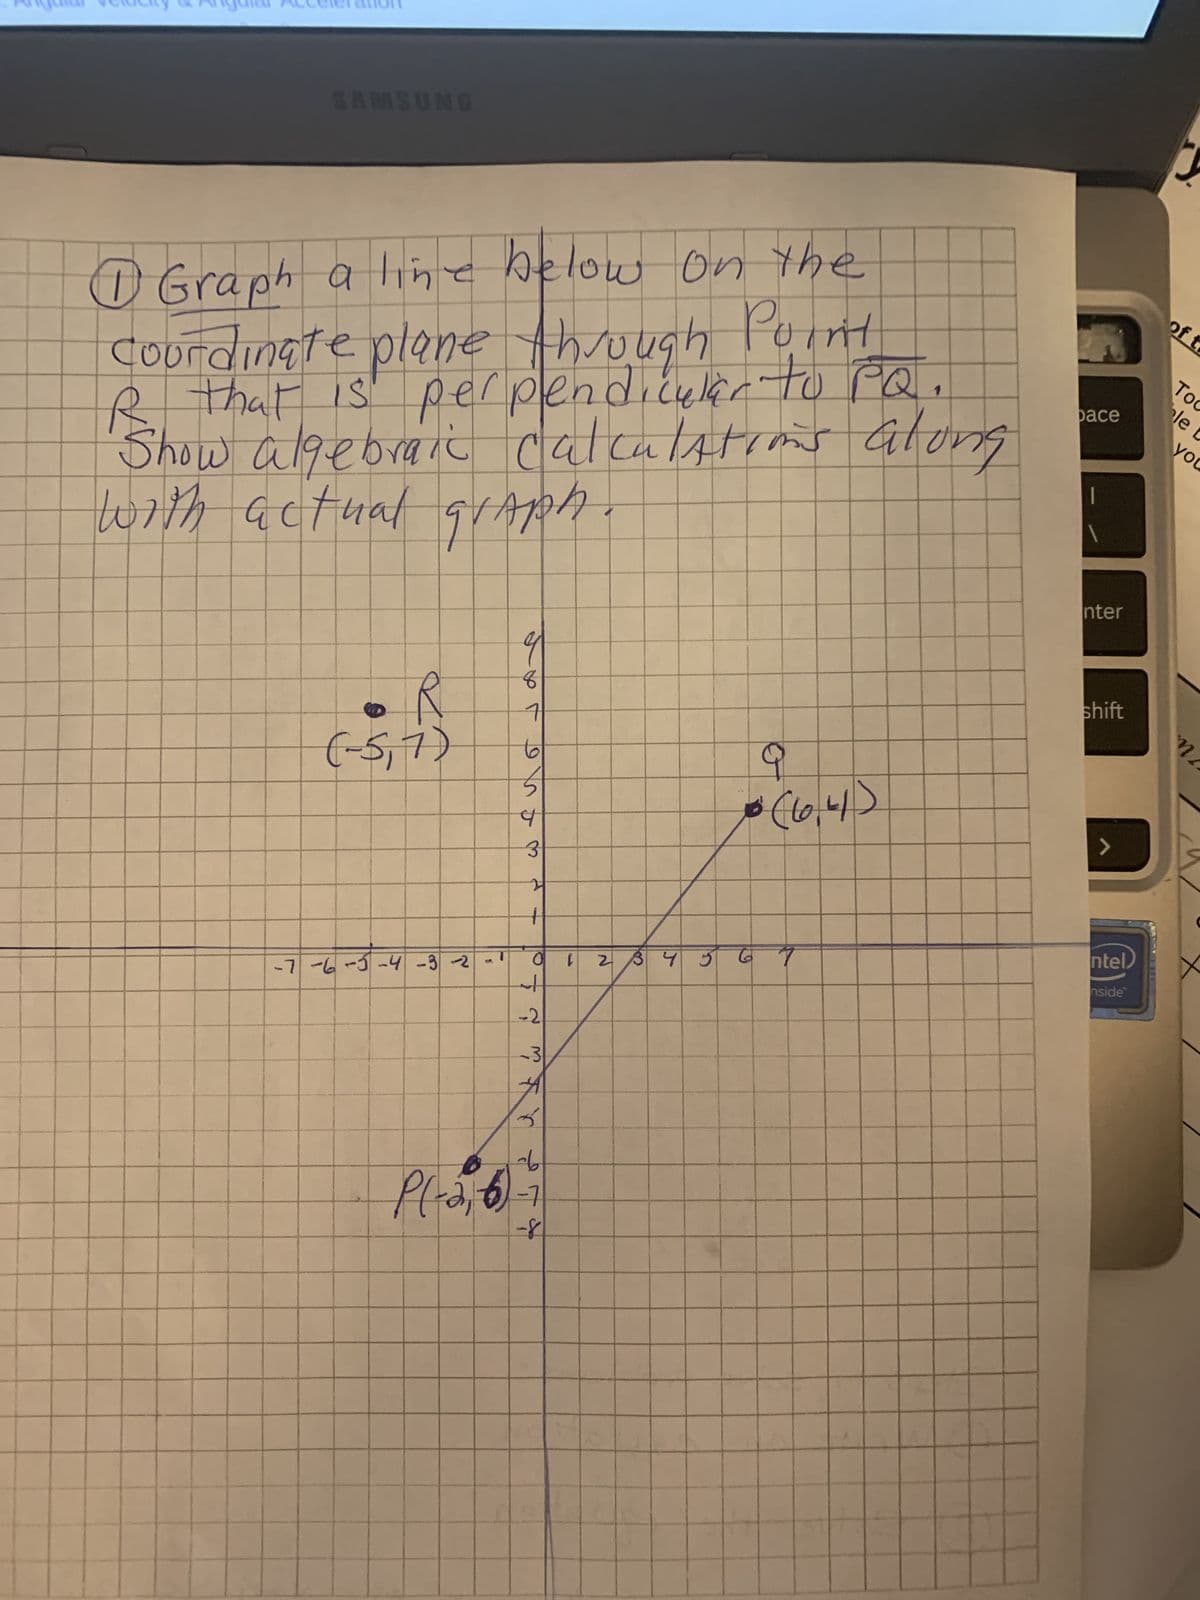 SAMSUNG
D Graph a line below on the
Coordinate plane through Point
R that is perpendicular to PQ.
Show algebraic calculations along
with actual grapA
R
(-5,7)
بسلام
-7-6-5-4-3-2-1
9
8
71
61
5
b
3
21
--
to
-21
- 31
A
qu
P(-2, 6)-7
-8
1
2 3 4 5
10 (10.4)
67
Dace
nter
shift
>
ntel
nside
of t
To
le
you
MA